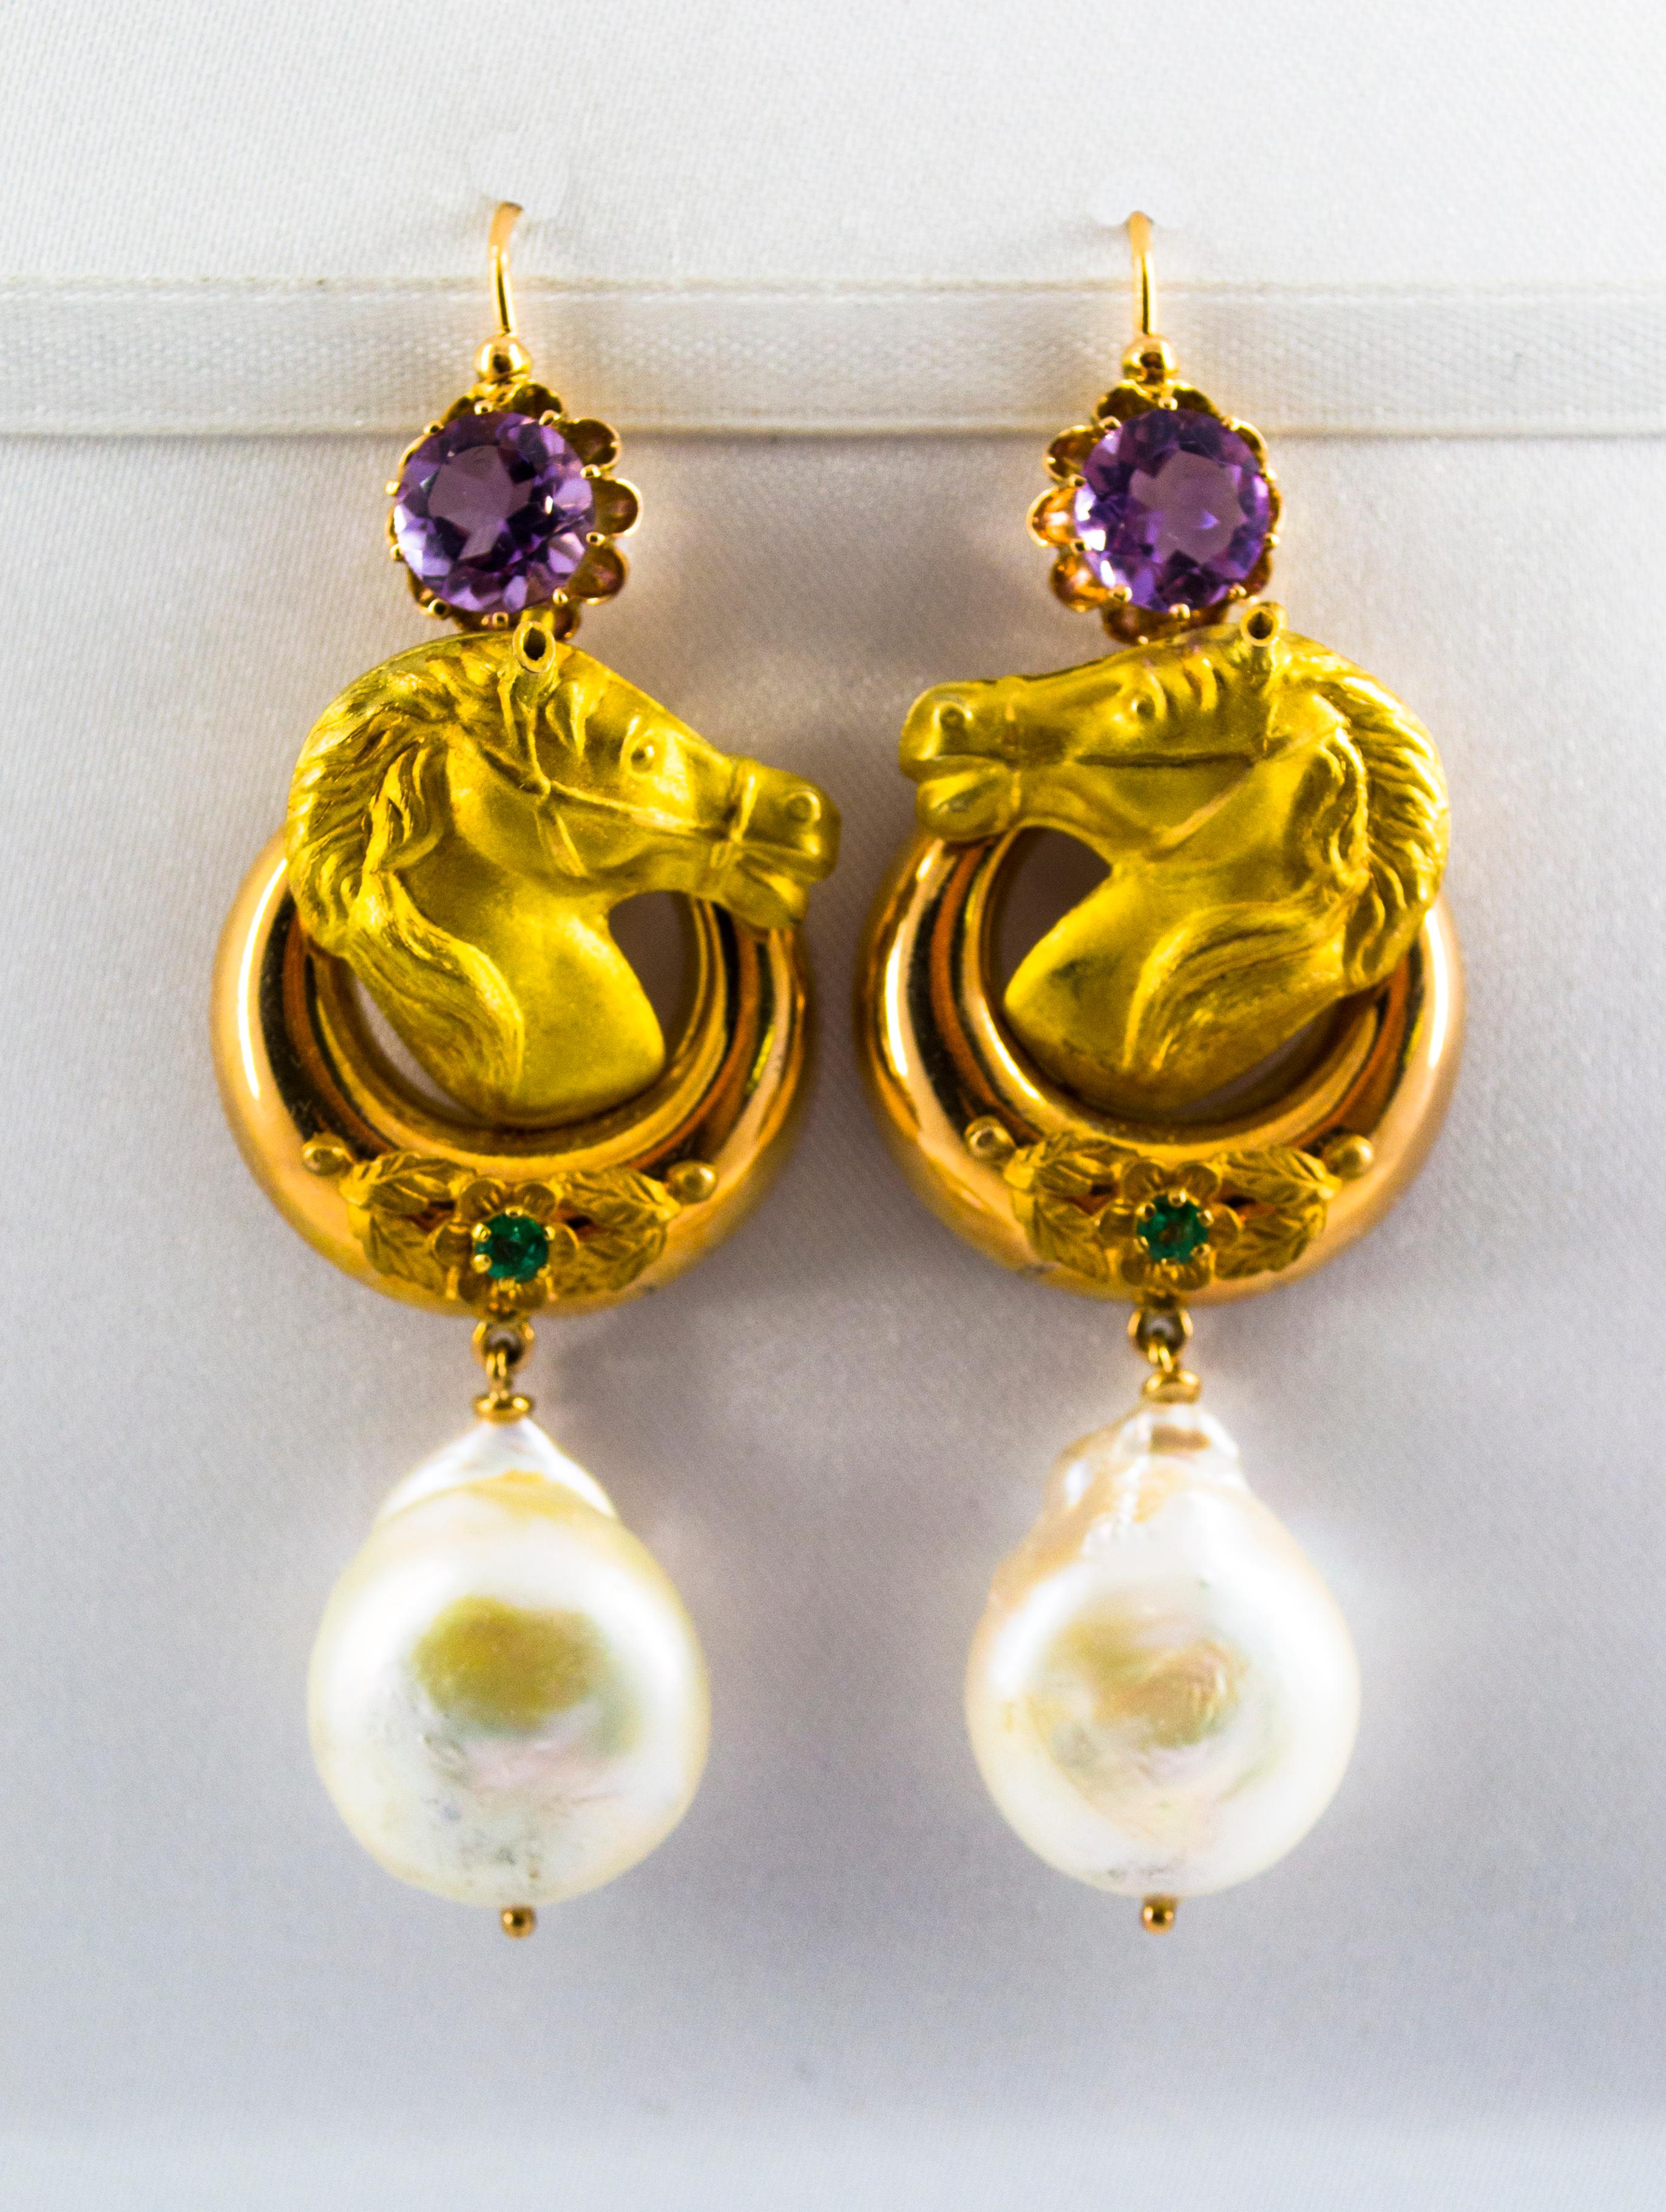 These Earrings are made of 14K Yellow Gold.
These Earrings have 0.20 Carats of Emeralds.
These Earrings have two Pearls.
These Earrings have Amethyst.
All our Earrings have pins for pierced ears but we can change the closure and make any of our